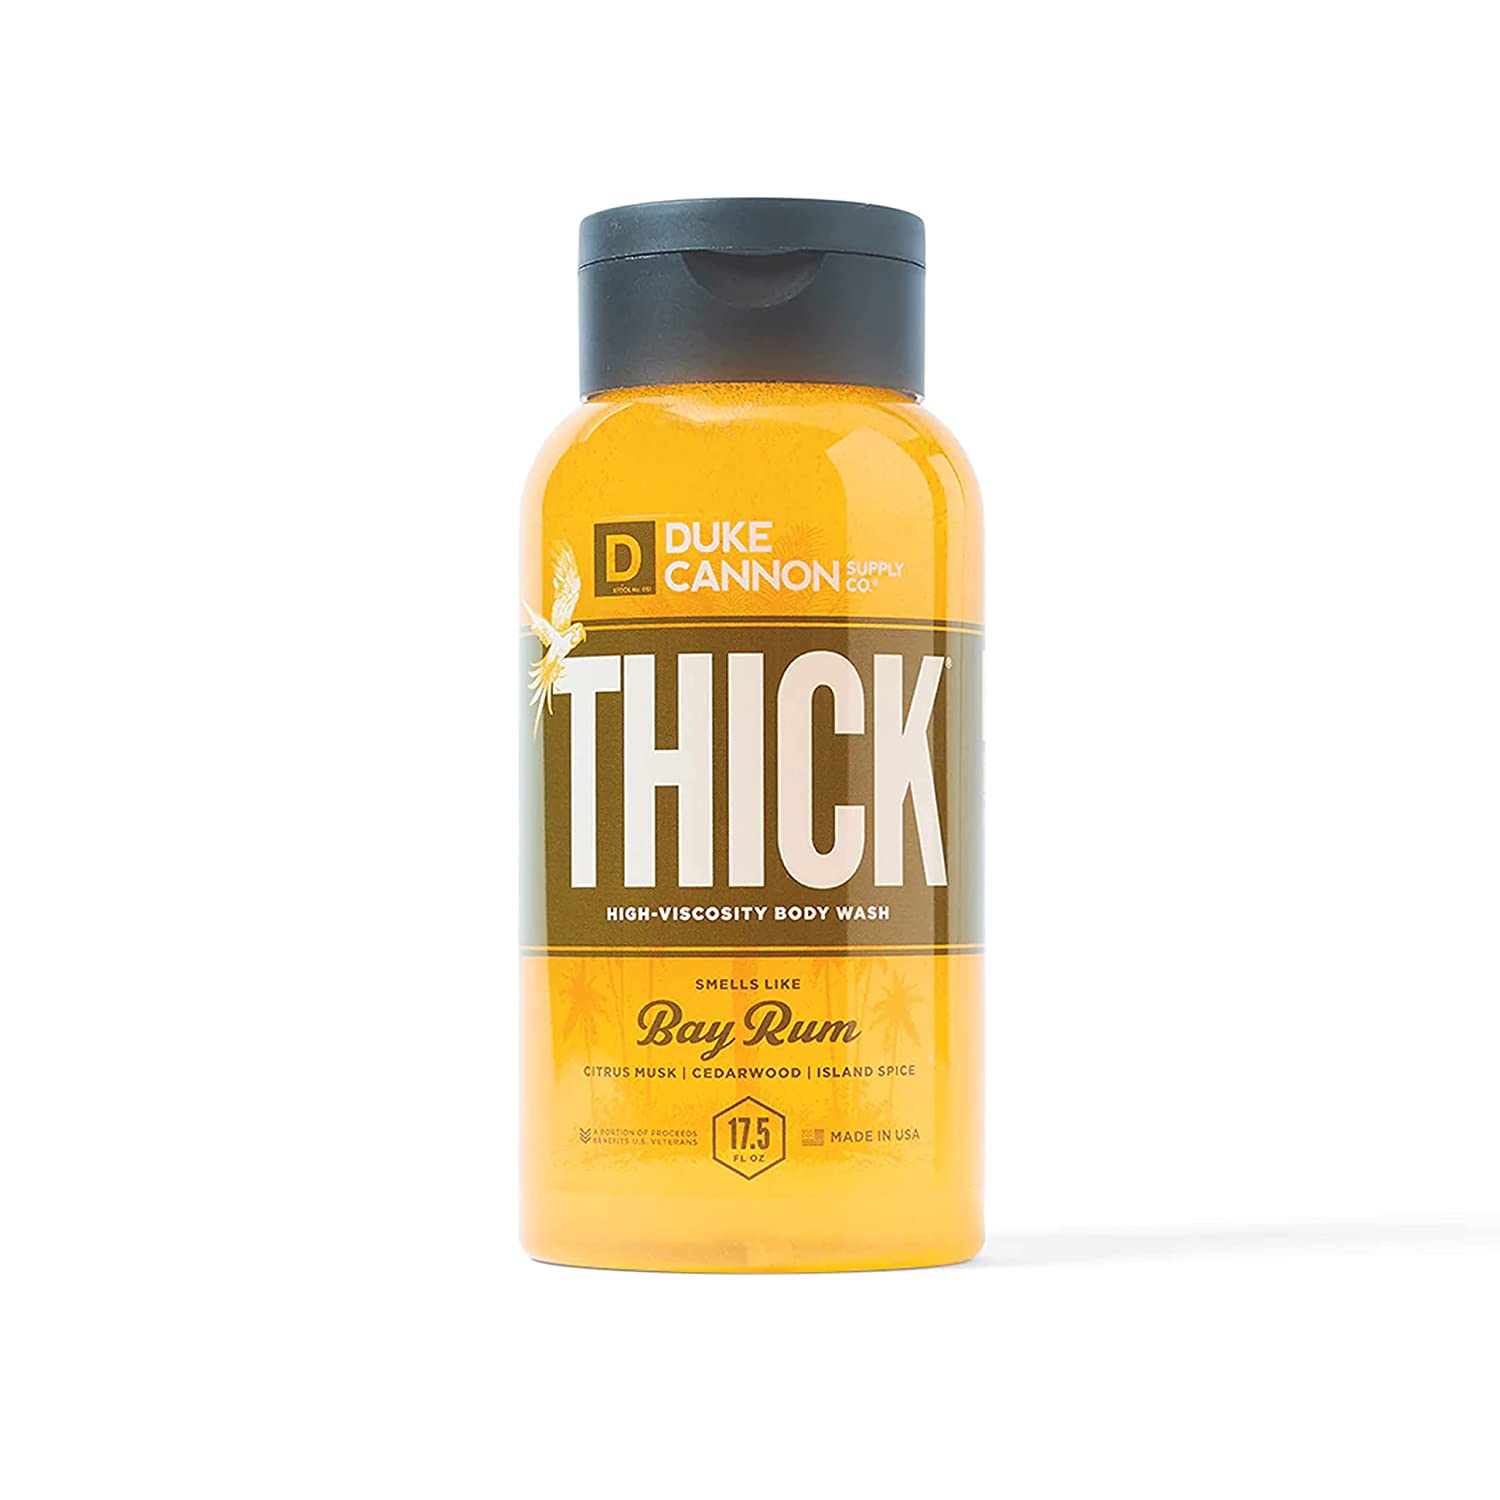 Thick Bay Rum Body Wash by Duke Cannon